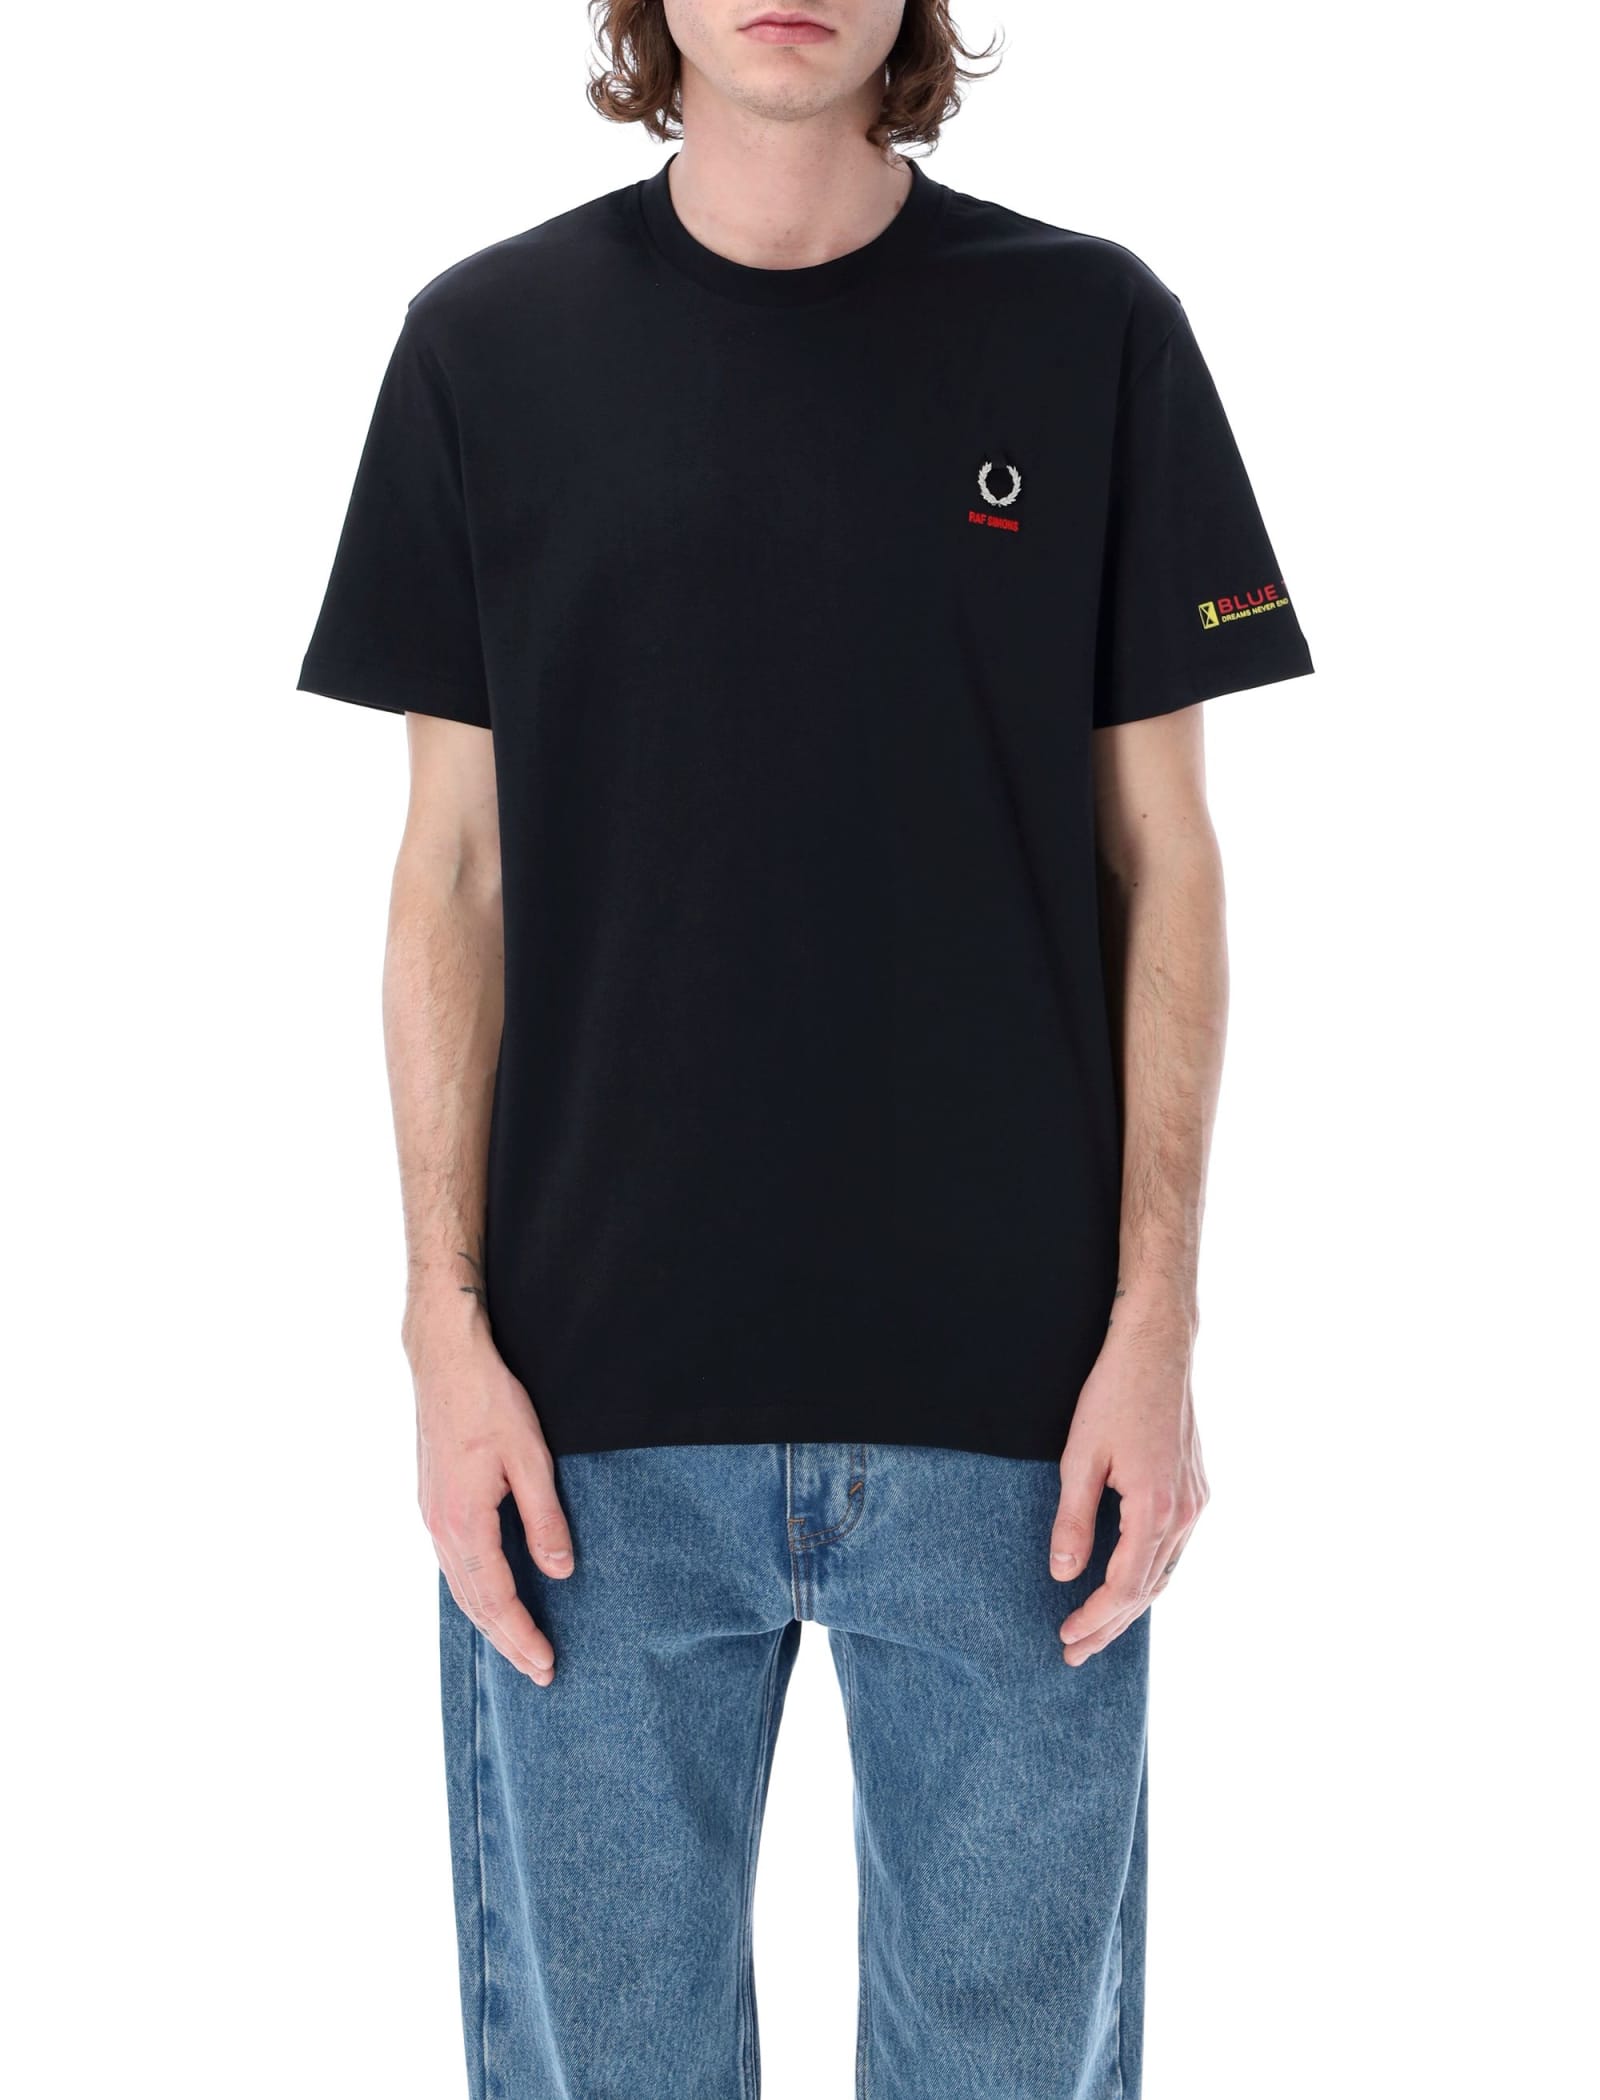 Fred Perry by Raf Simons Printed Sleeve T-shirt